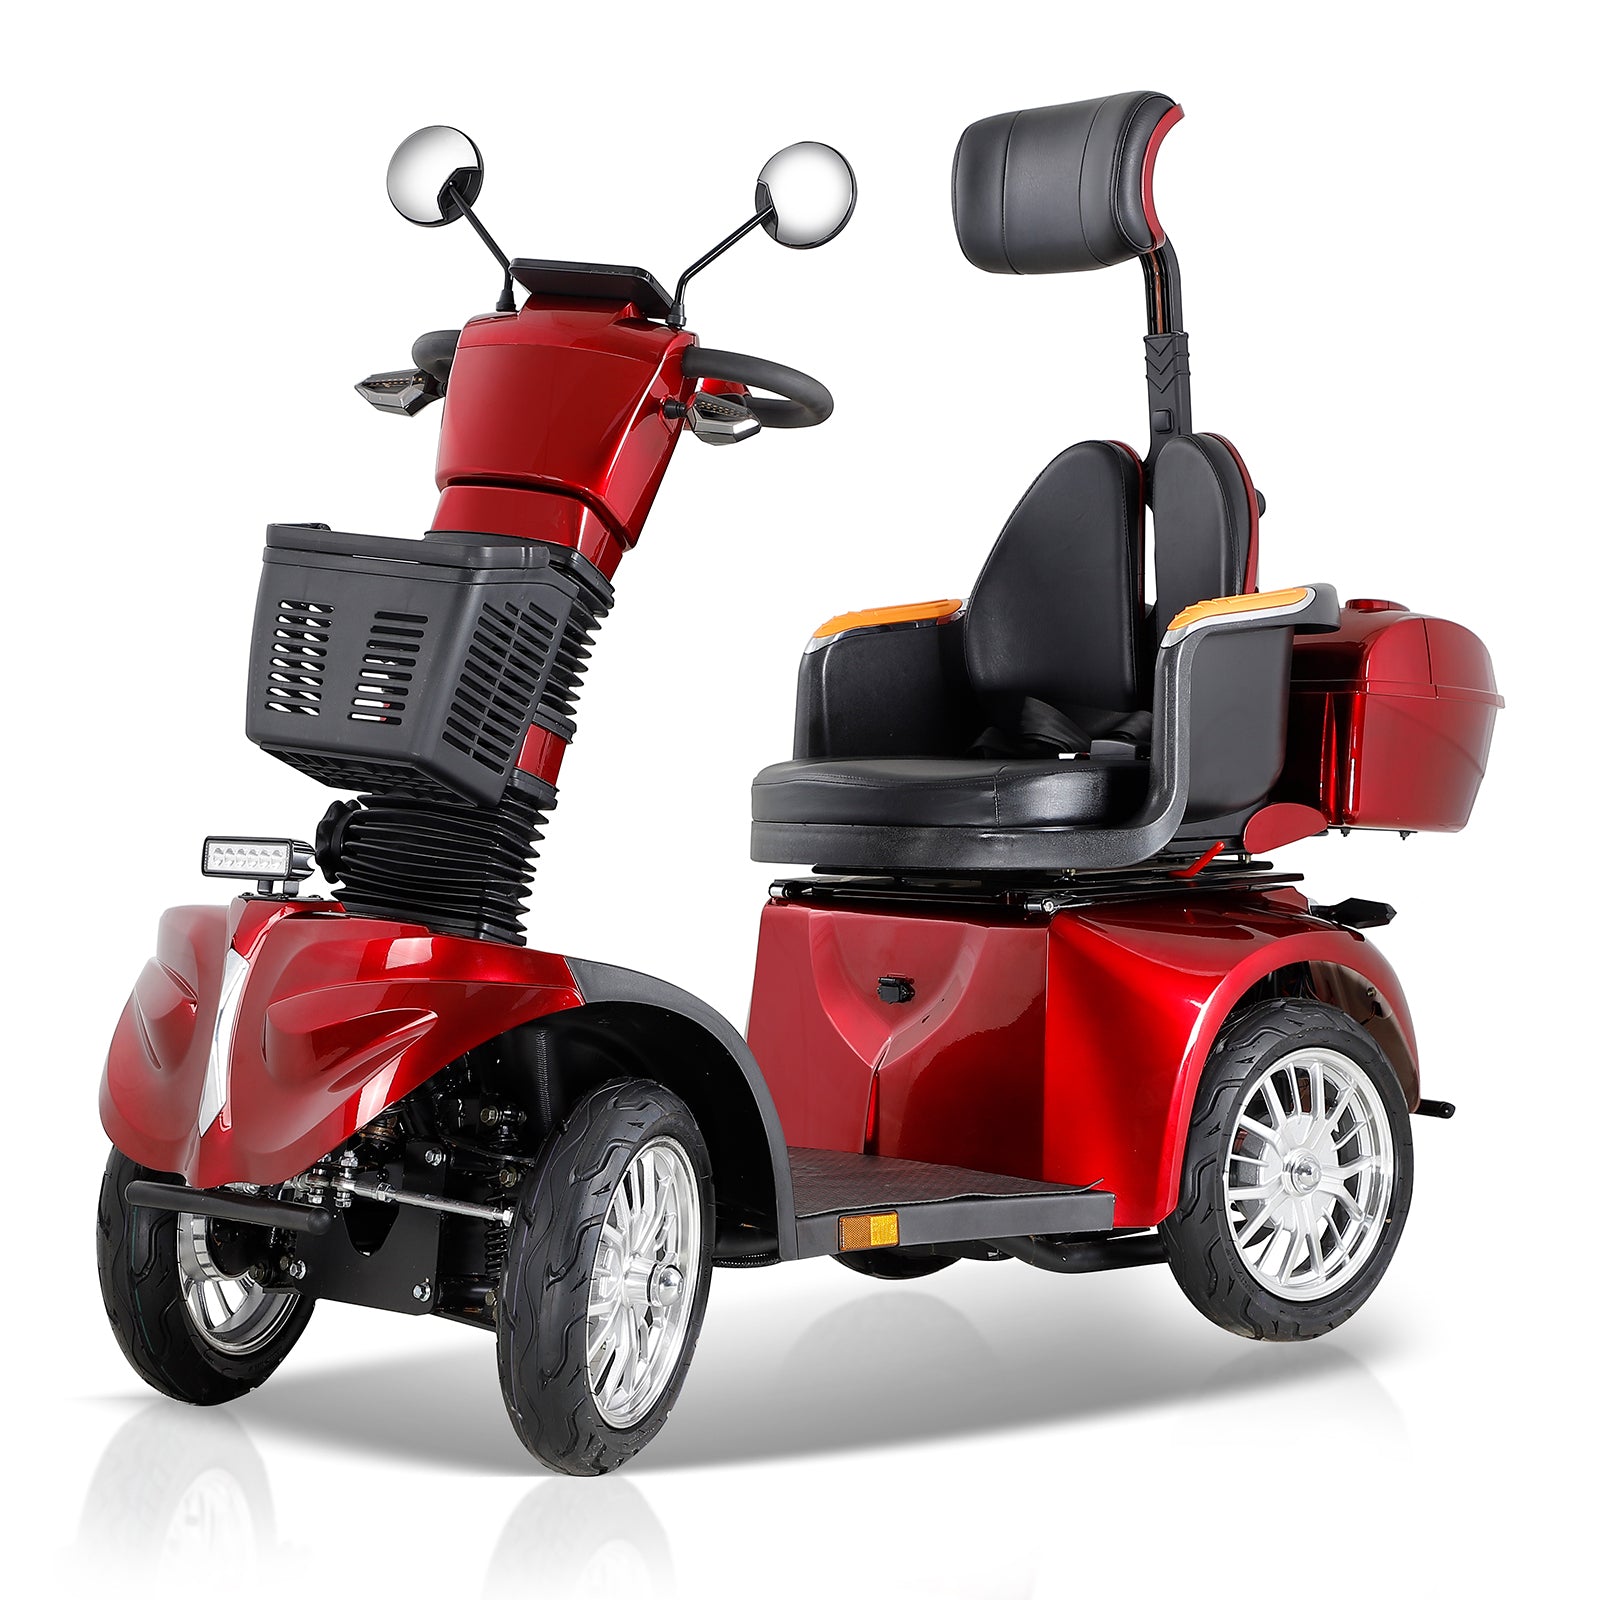 Fat tire scooter with comfortable seat and adjust seat